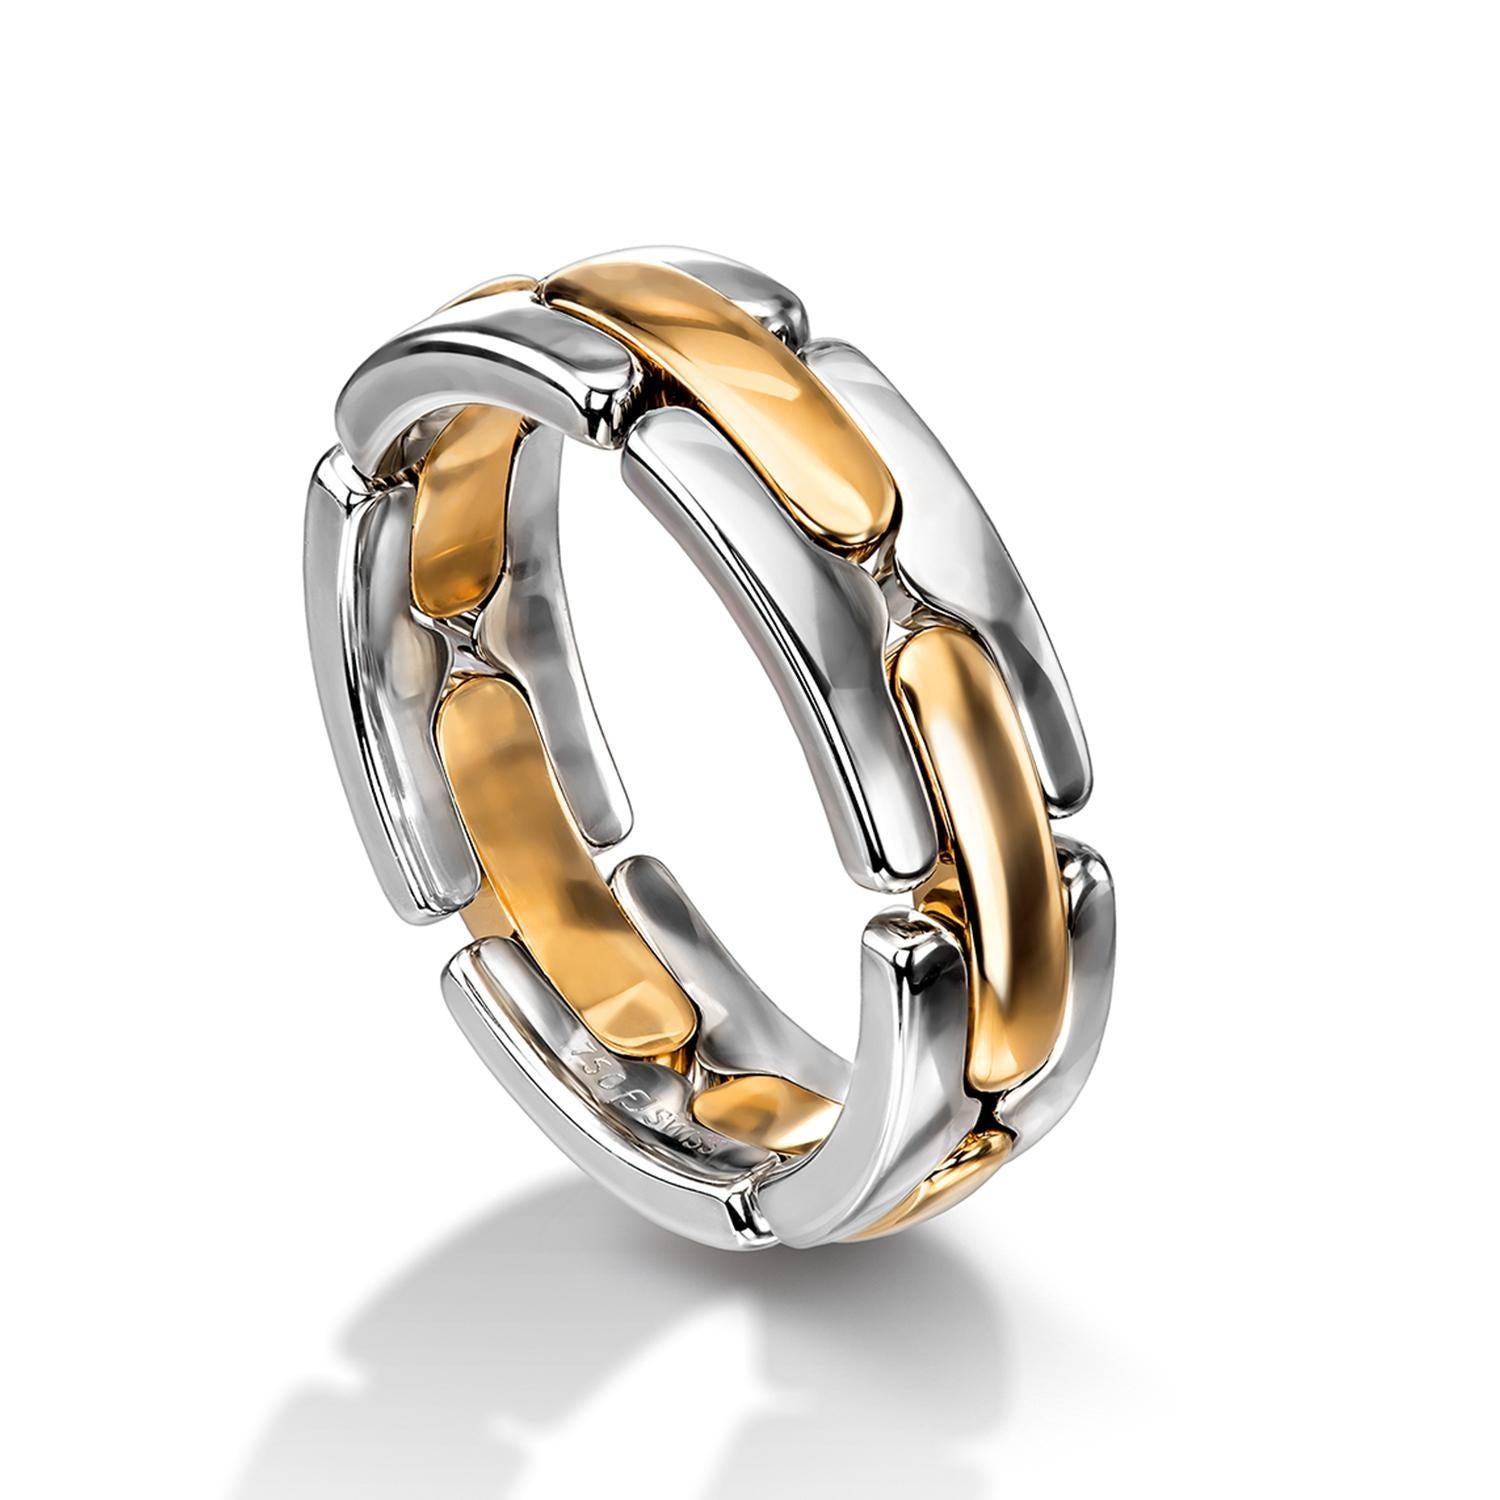 For Sale:  Furrer Jacot 18 Karat Yellow Gold Collapsible Link Ring 4